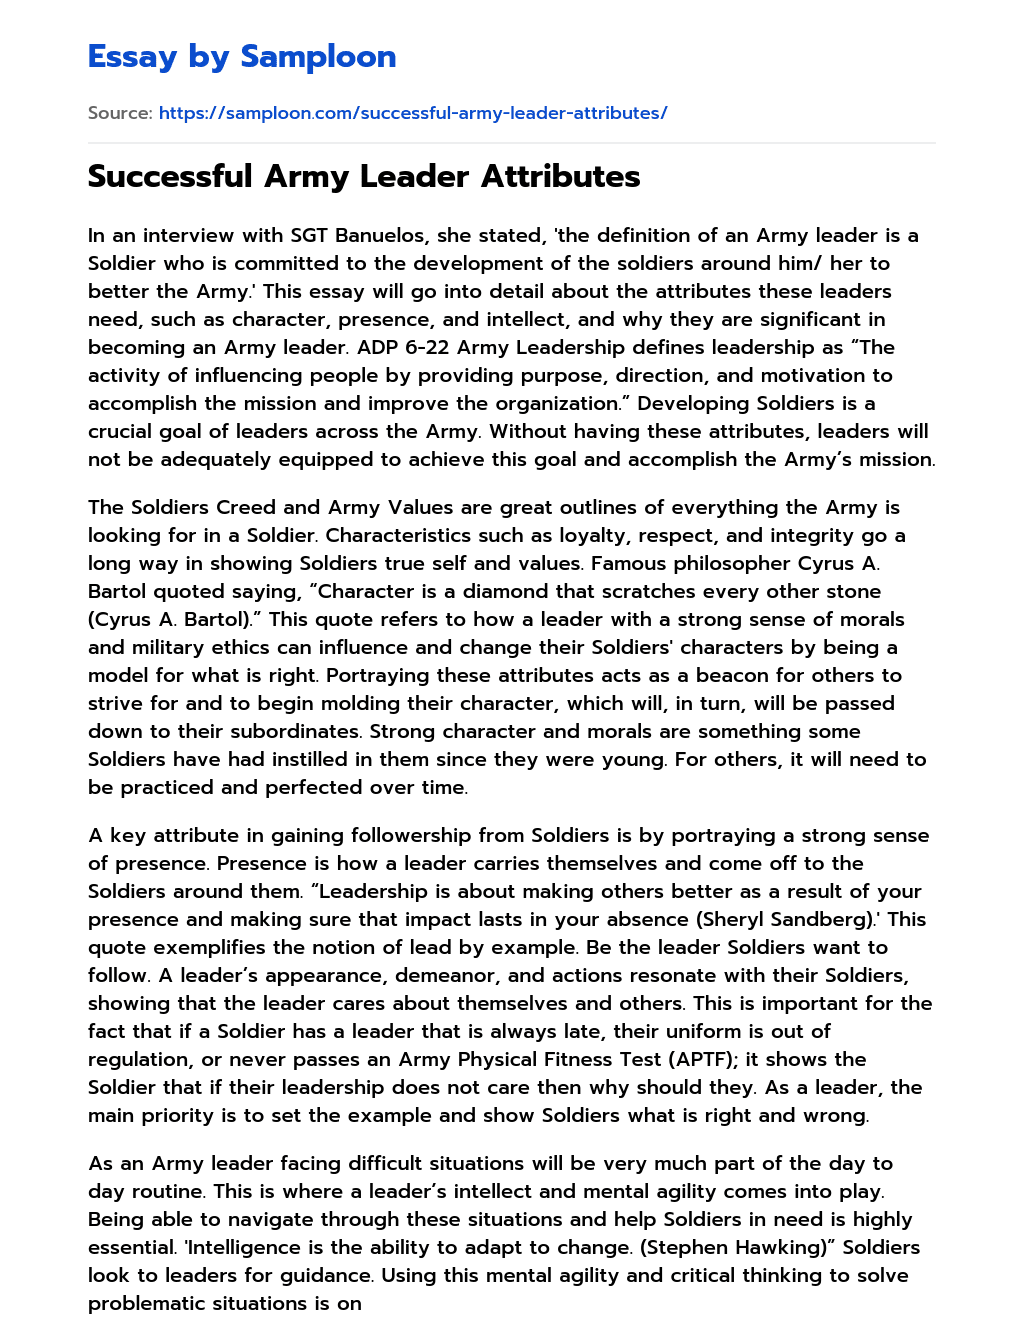 leadership and the army profession essay blc